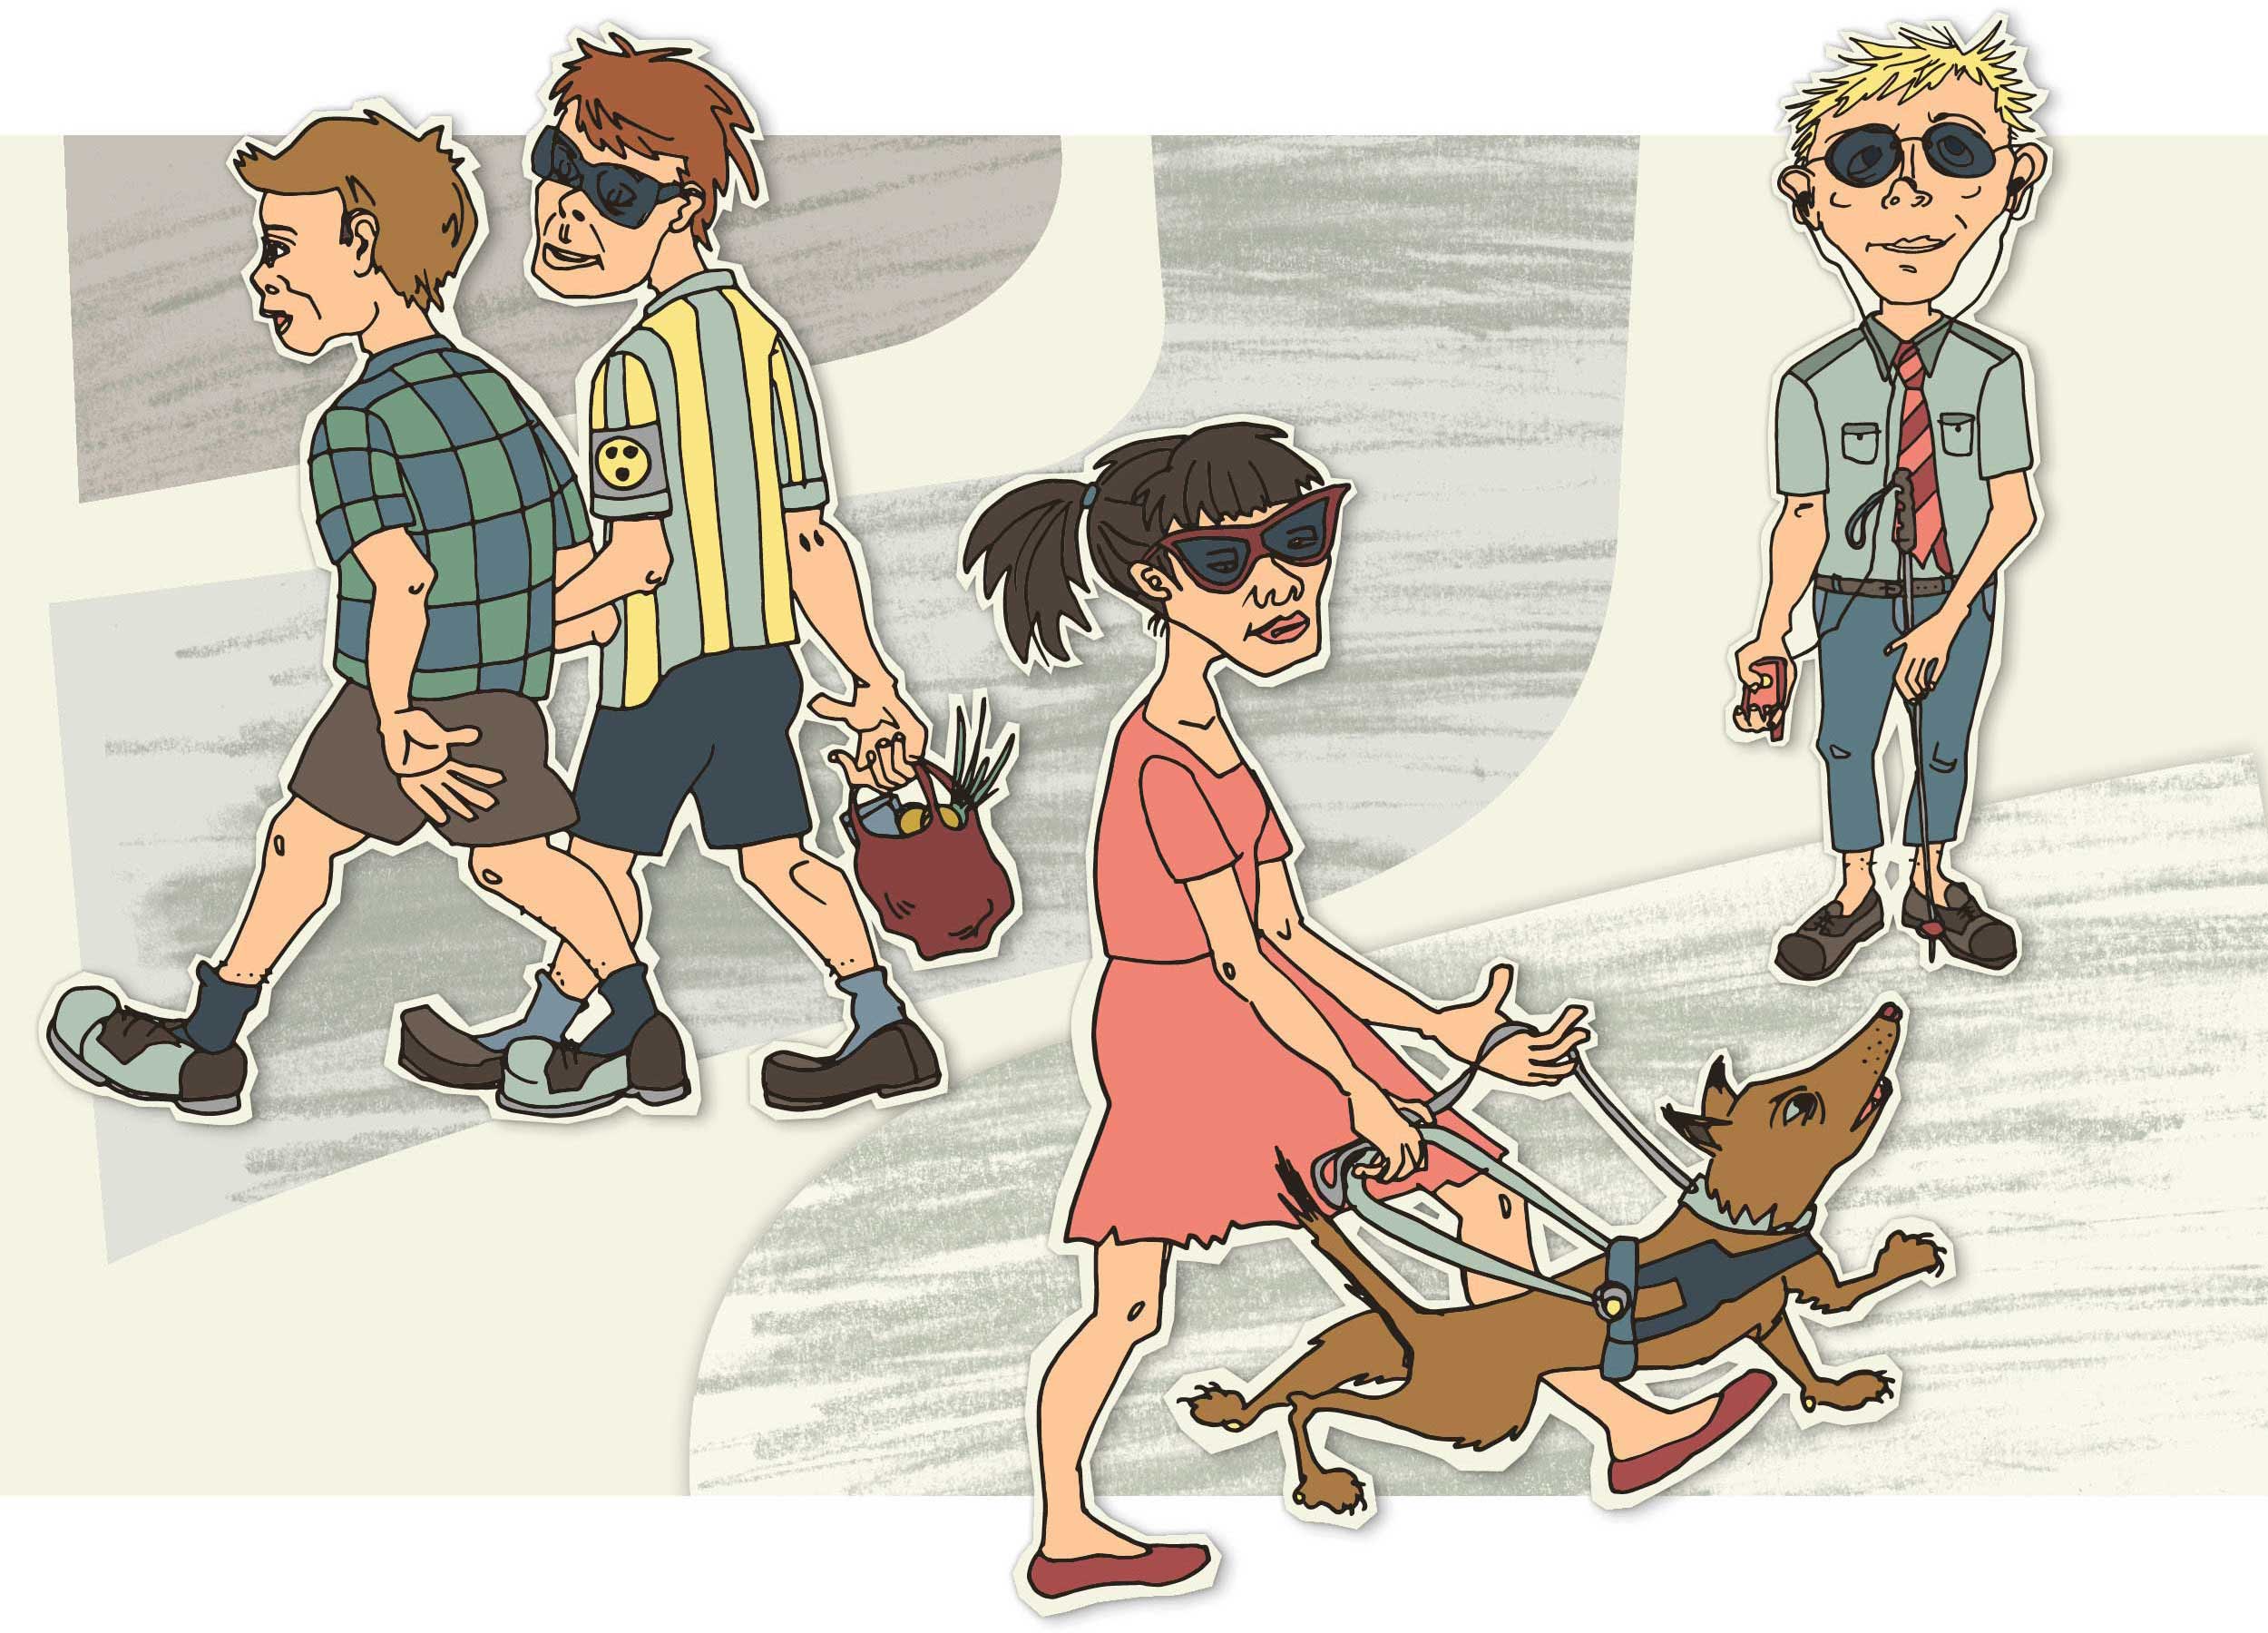 Image of a hand-drawn illustration: two young people, one of them blind, on their way home from shopping, a blind girl with a guide dog walking to their right and, again, a blind young person with an iPod next to her. All fashionably dressed and walking independently.